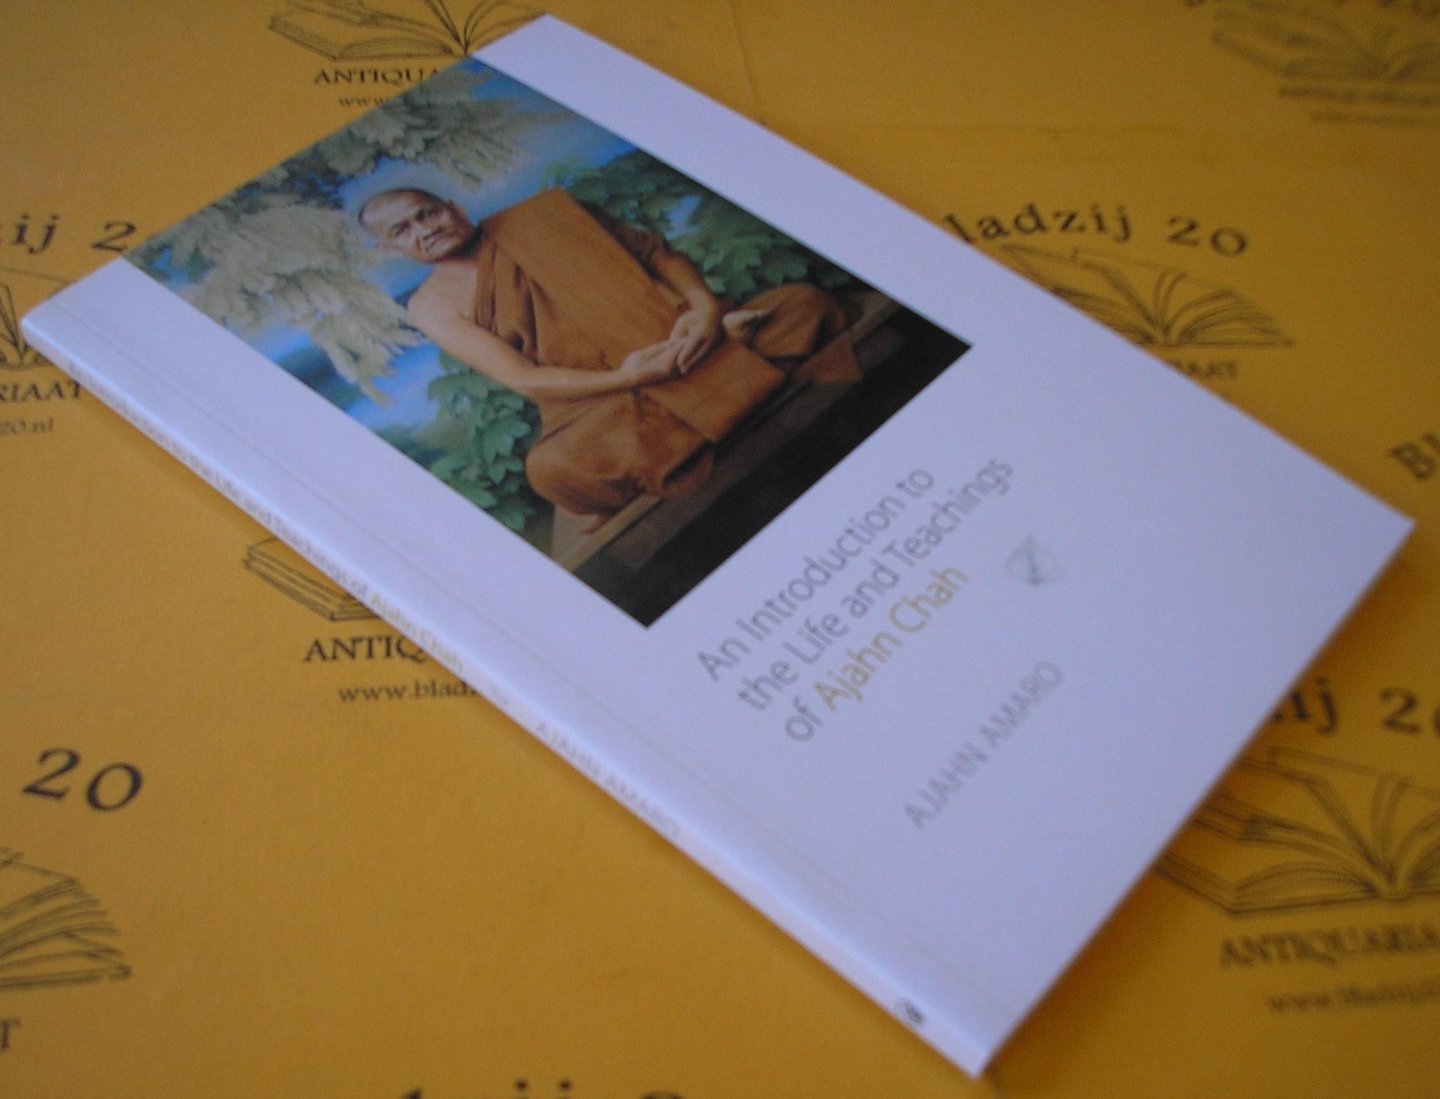 Amaro, Ajahn. - An introduction to the life and teachings of Ajhan Chah.